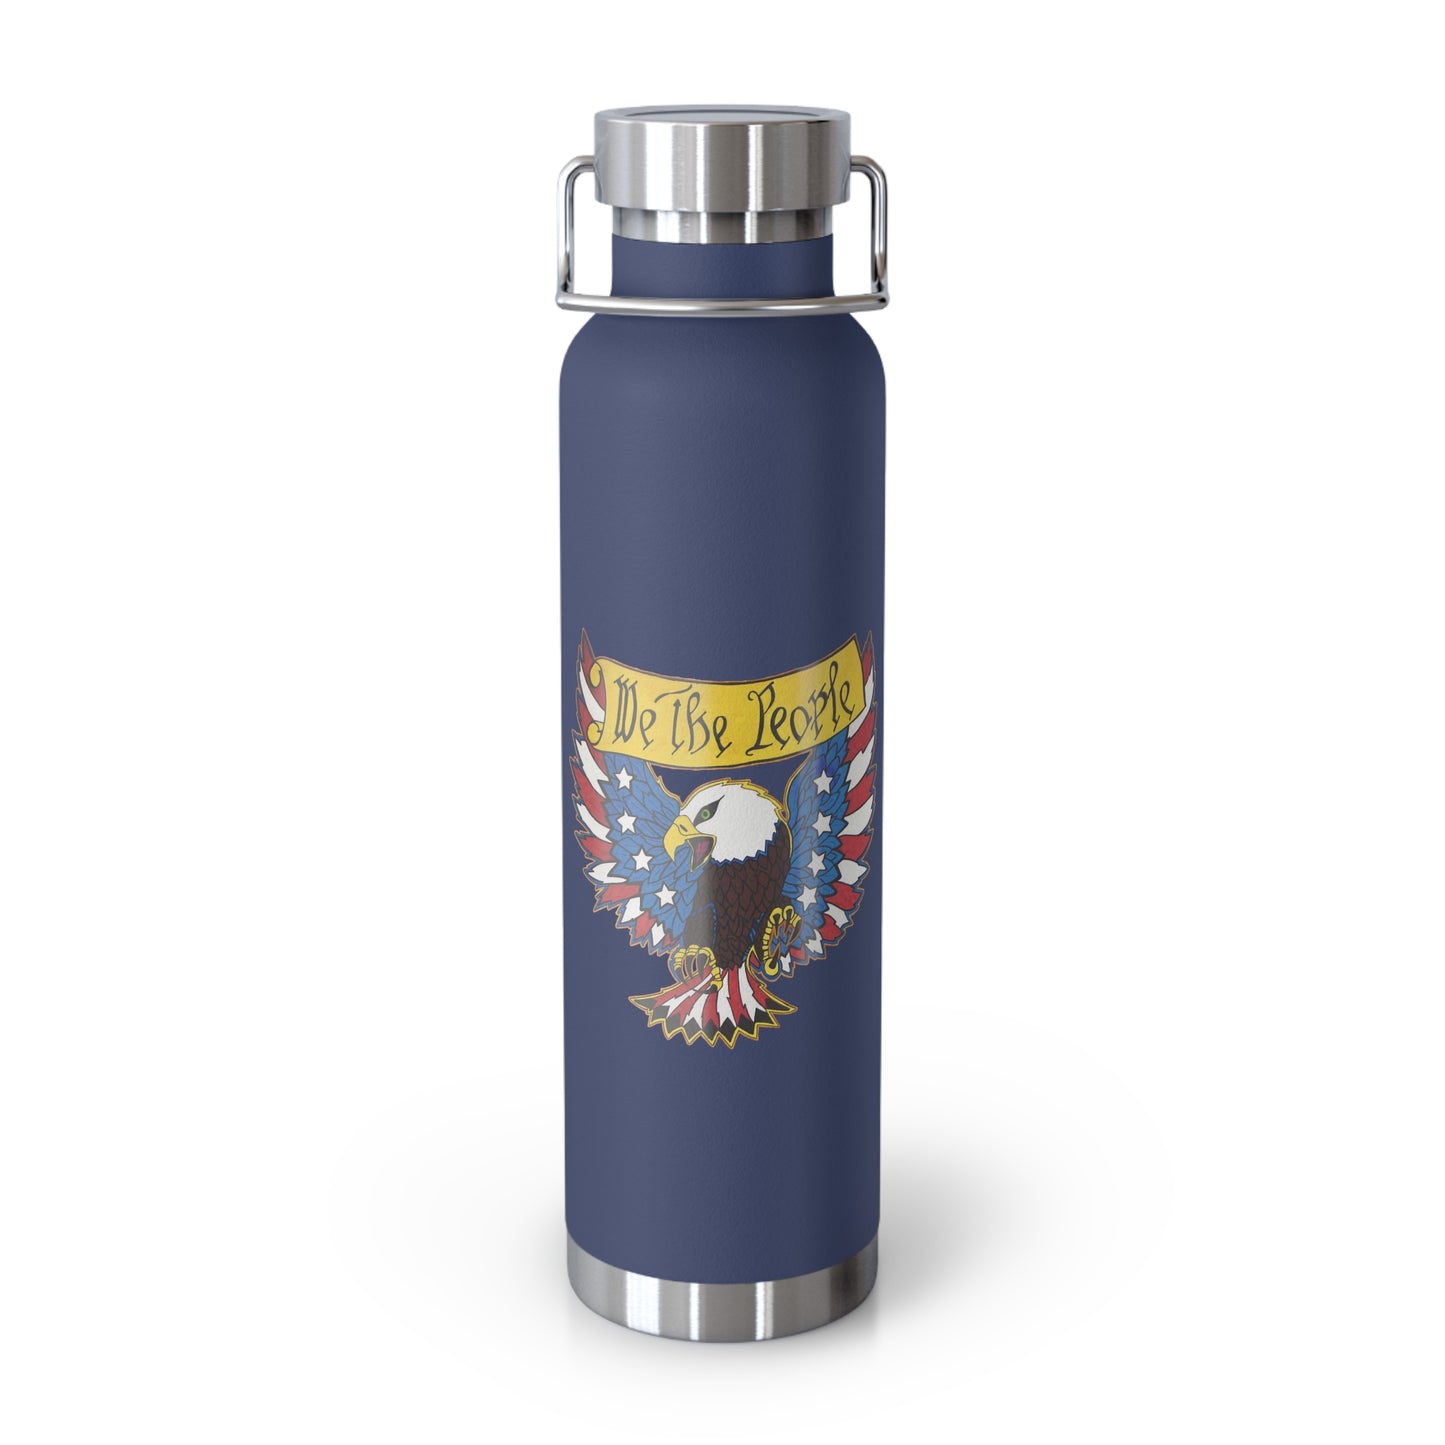 ..WE THE PEOPLE:  22oz Copper Vacuum Insulated Patriotic Water Bottle - FREE SHIPPING